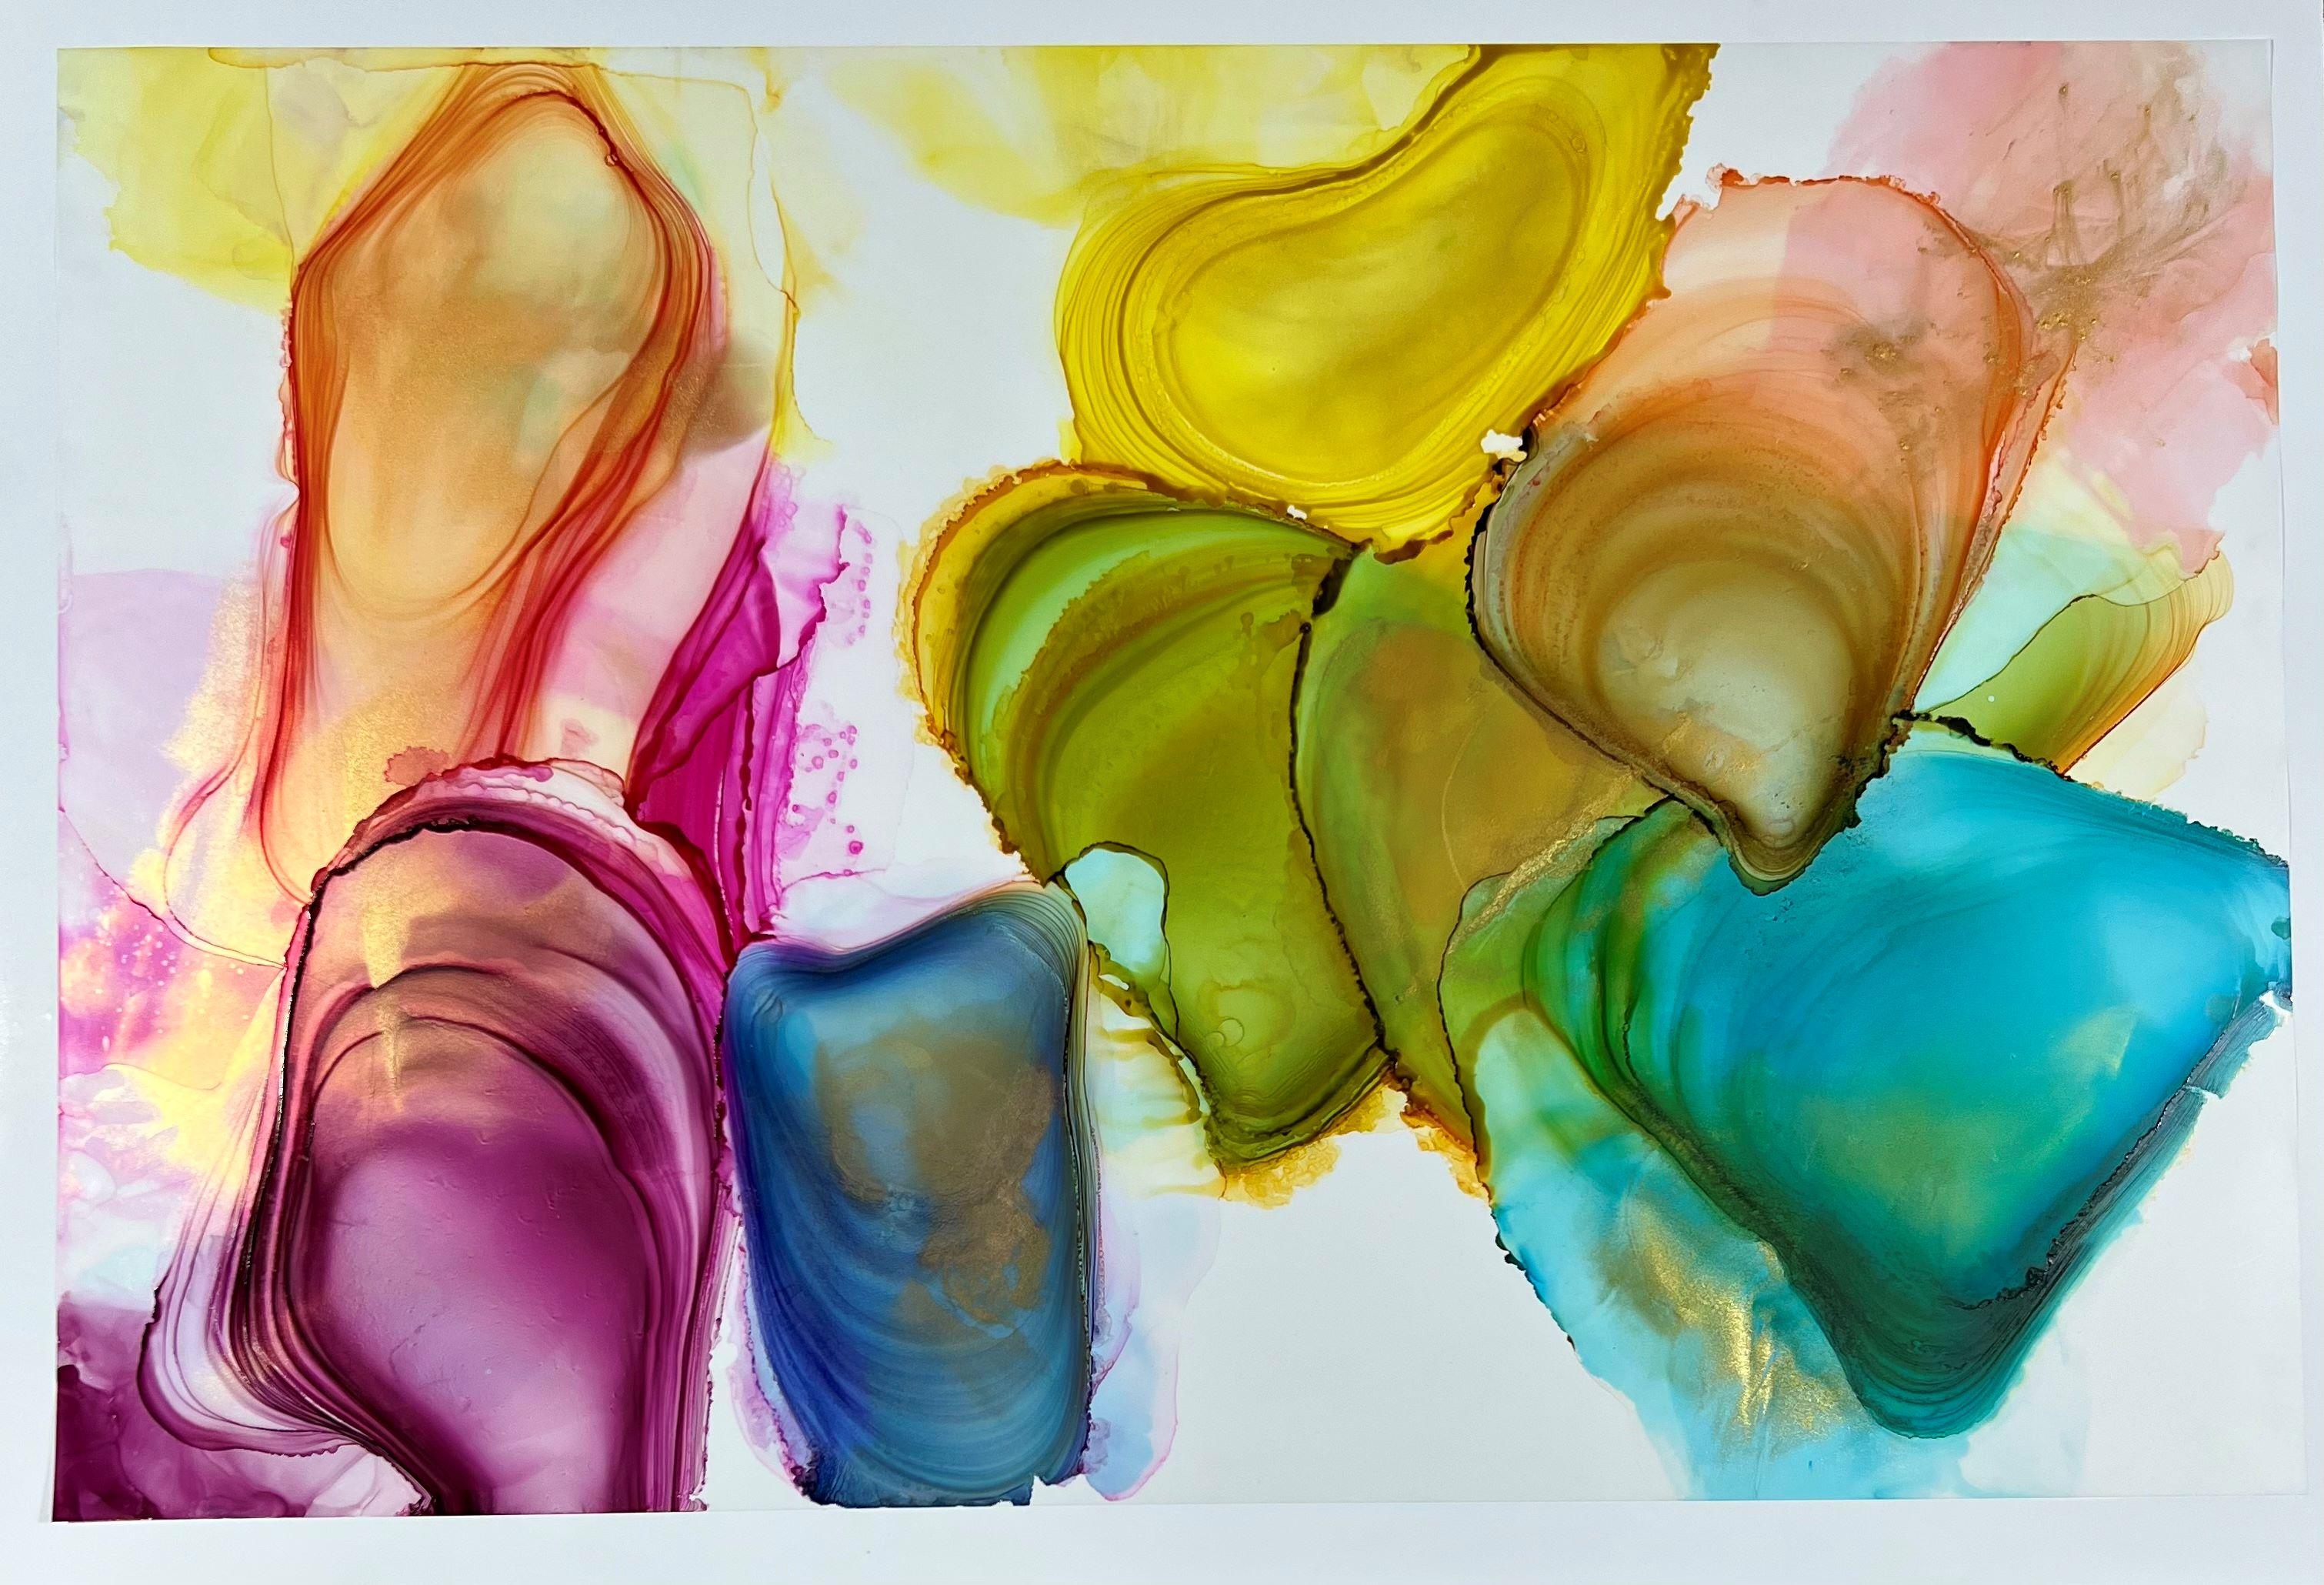 <p>Artist Comments<br>Luminous, vibrant gems take center stage in this dazzling abstract by artist Eric Wilson. Fluid layers of alcohol ink cascade in a dynamic display of color, with each hue radiating toward the other. The energy from the painting